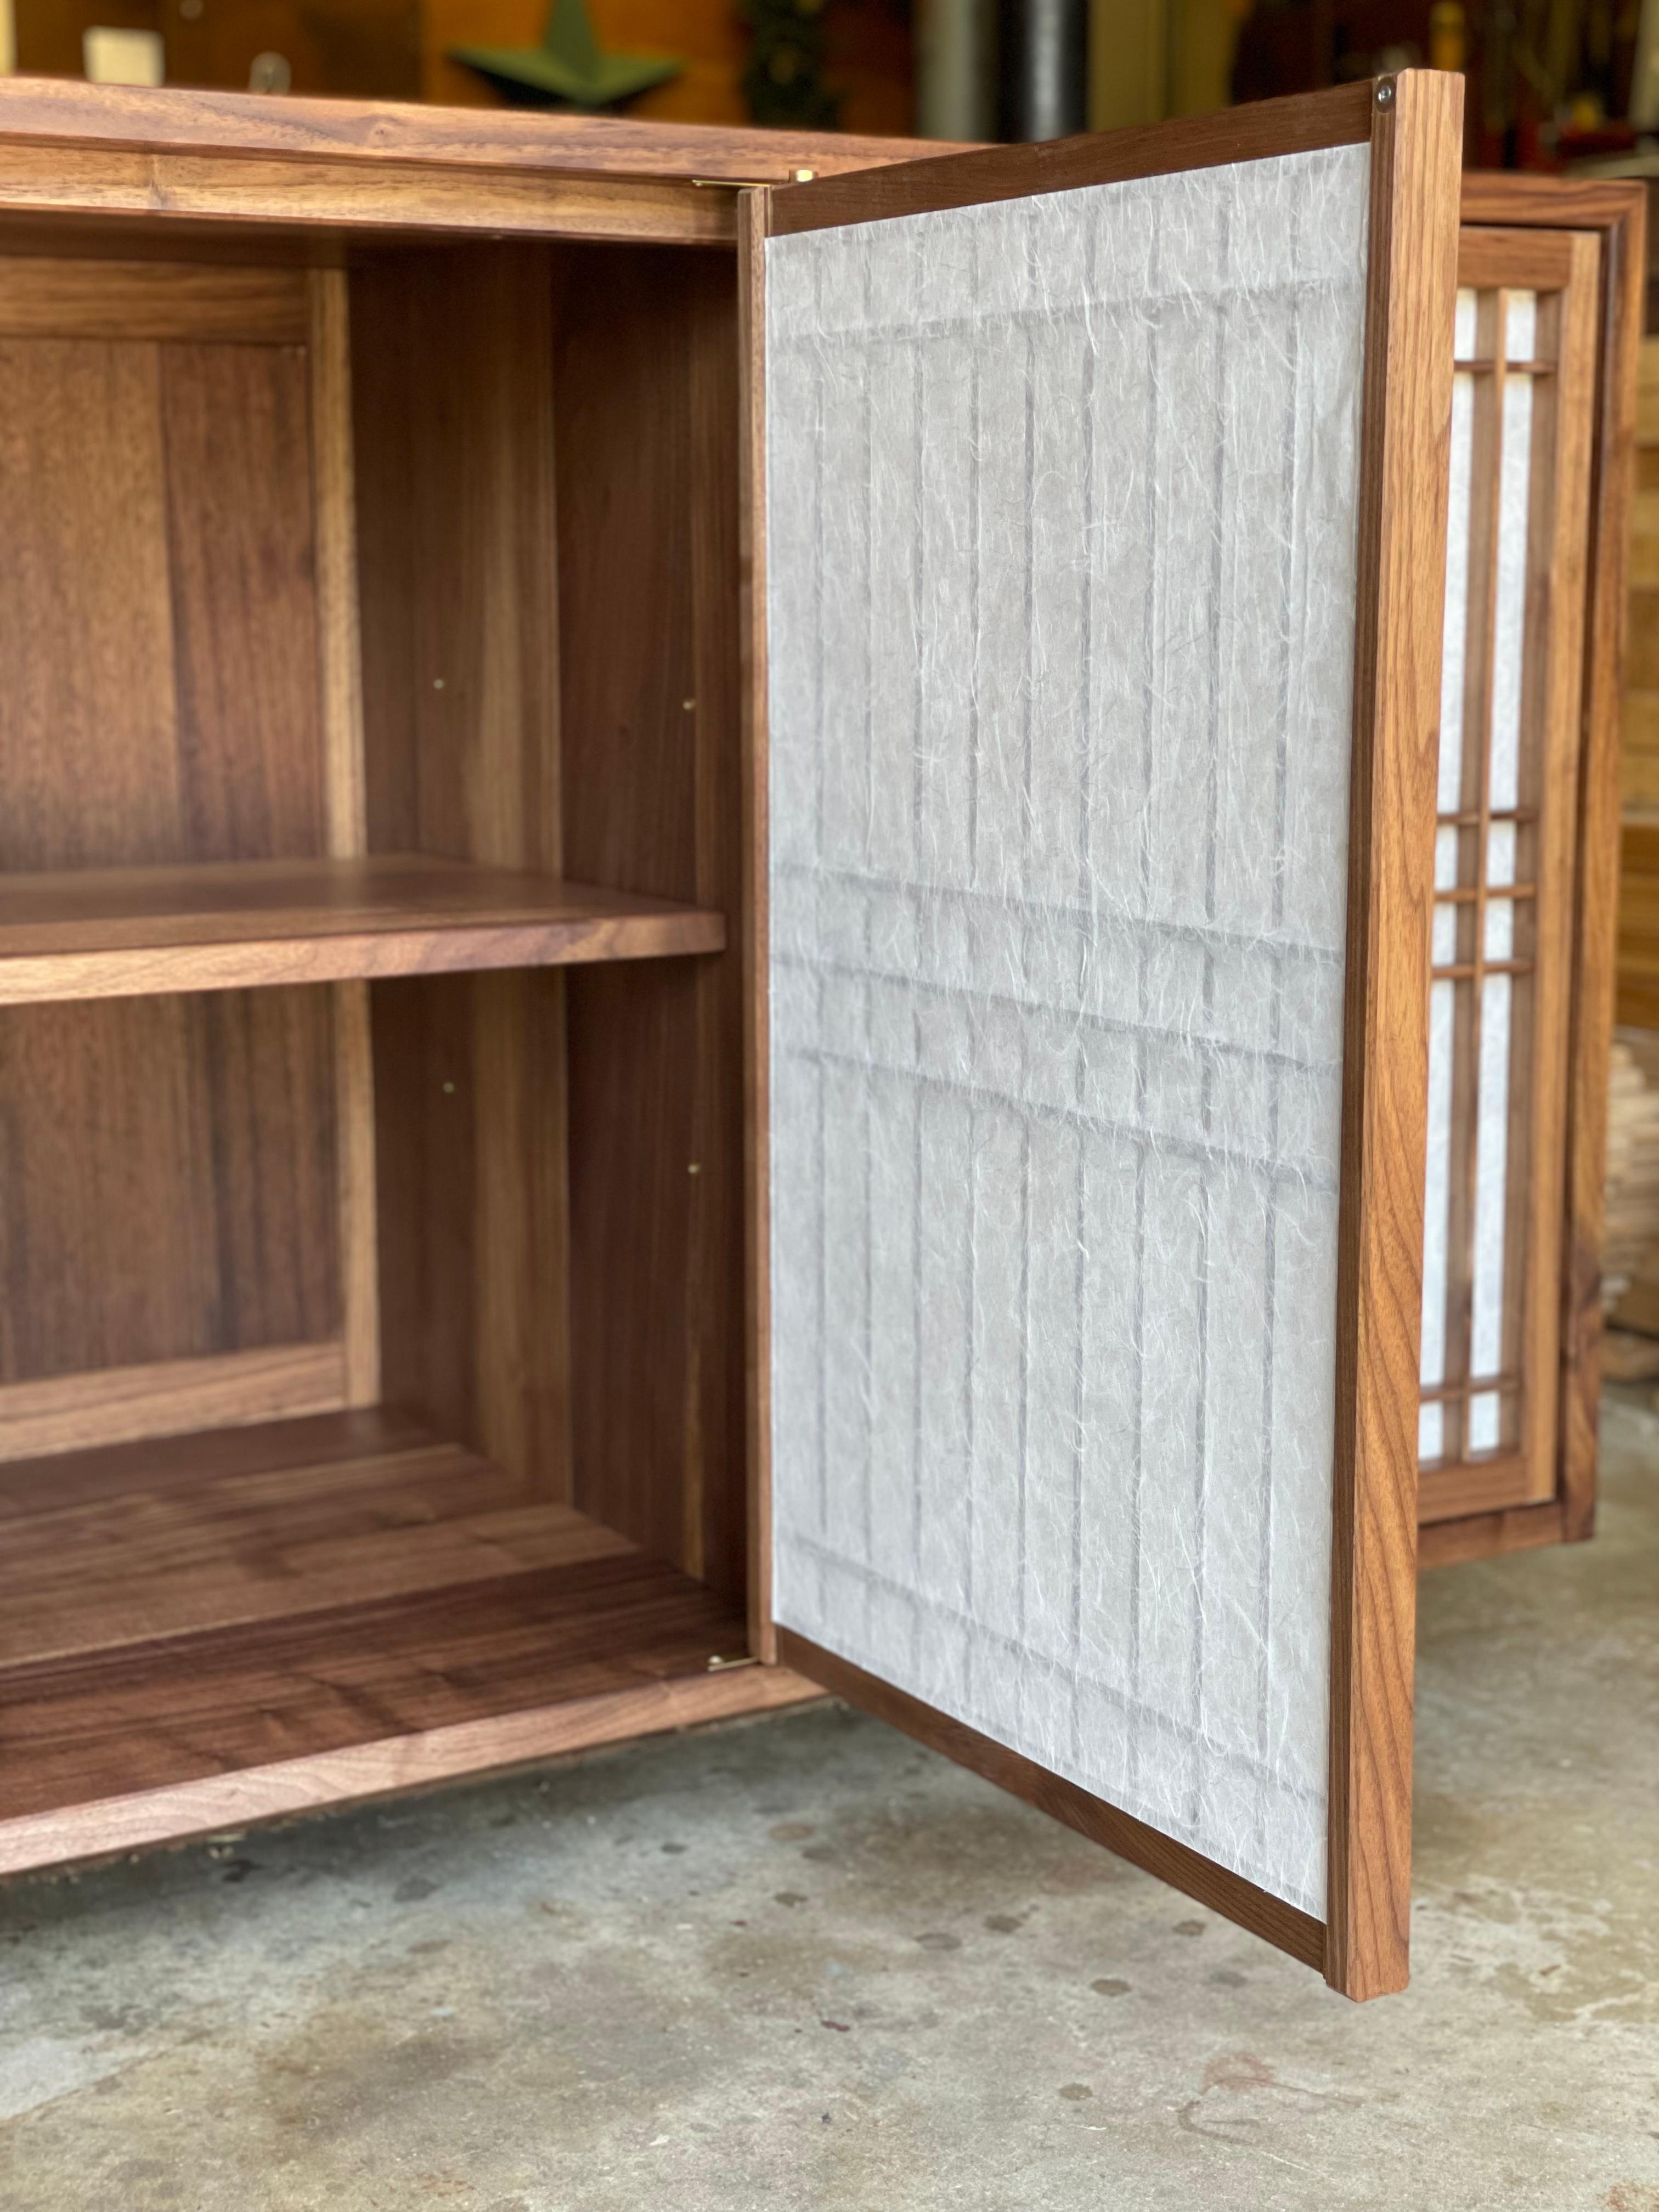 Walnut cabinet made by hand and featuring shoji doors and shelves. This cabinet is constructed utilizing time honored joinery techniques featured in Japanese temple carpentry in addition it features shoji made utilizing those same traditional